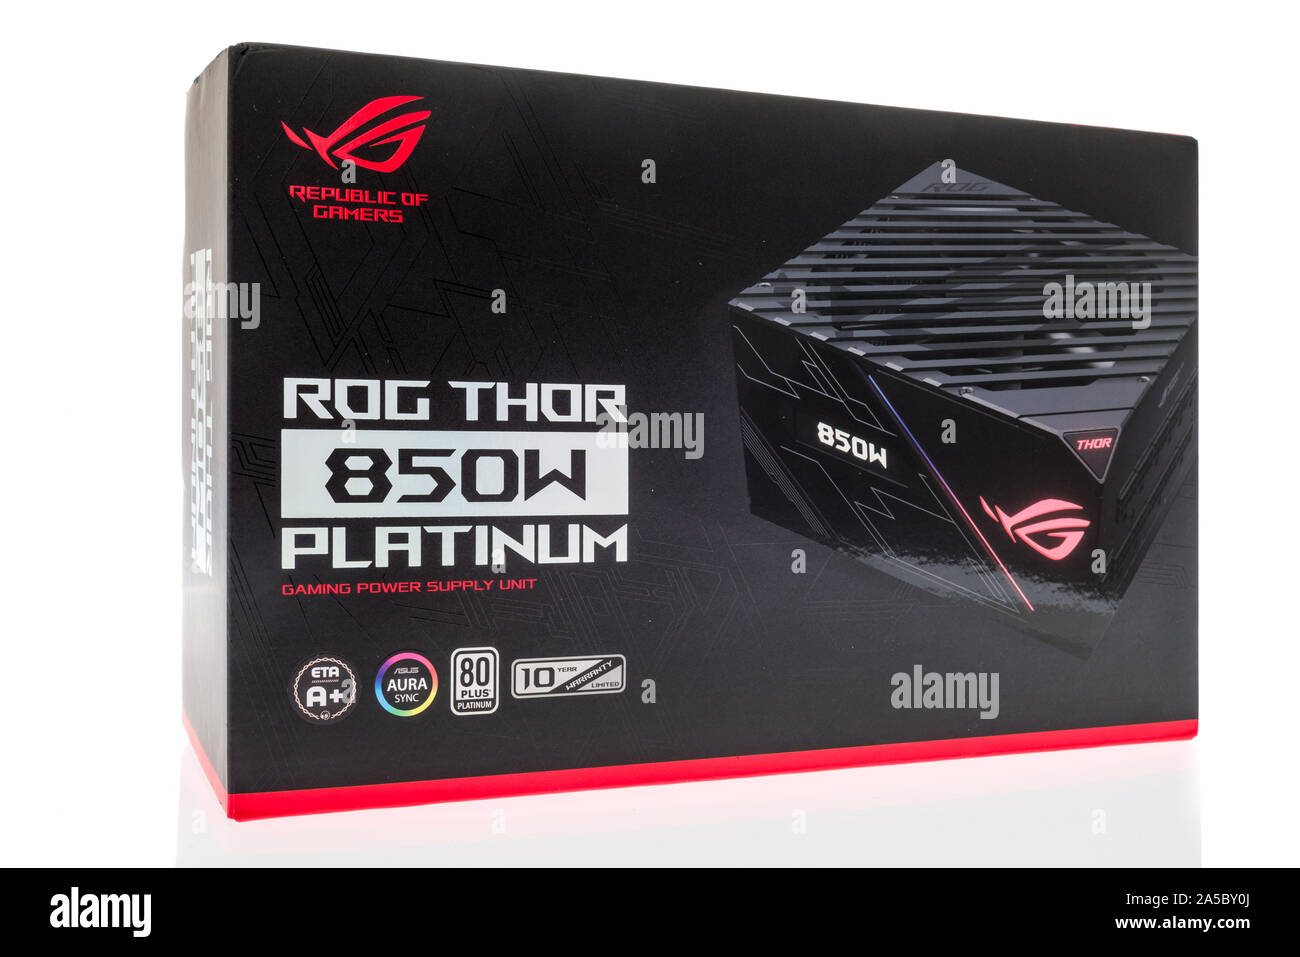 Winneconne, WI - 4 October 2019: A package of ASUS gaming power supply unit platinum republic of gamers computer parts Stock Photo